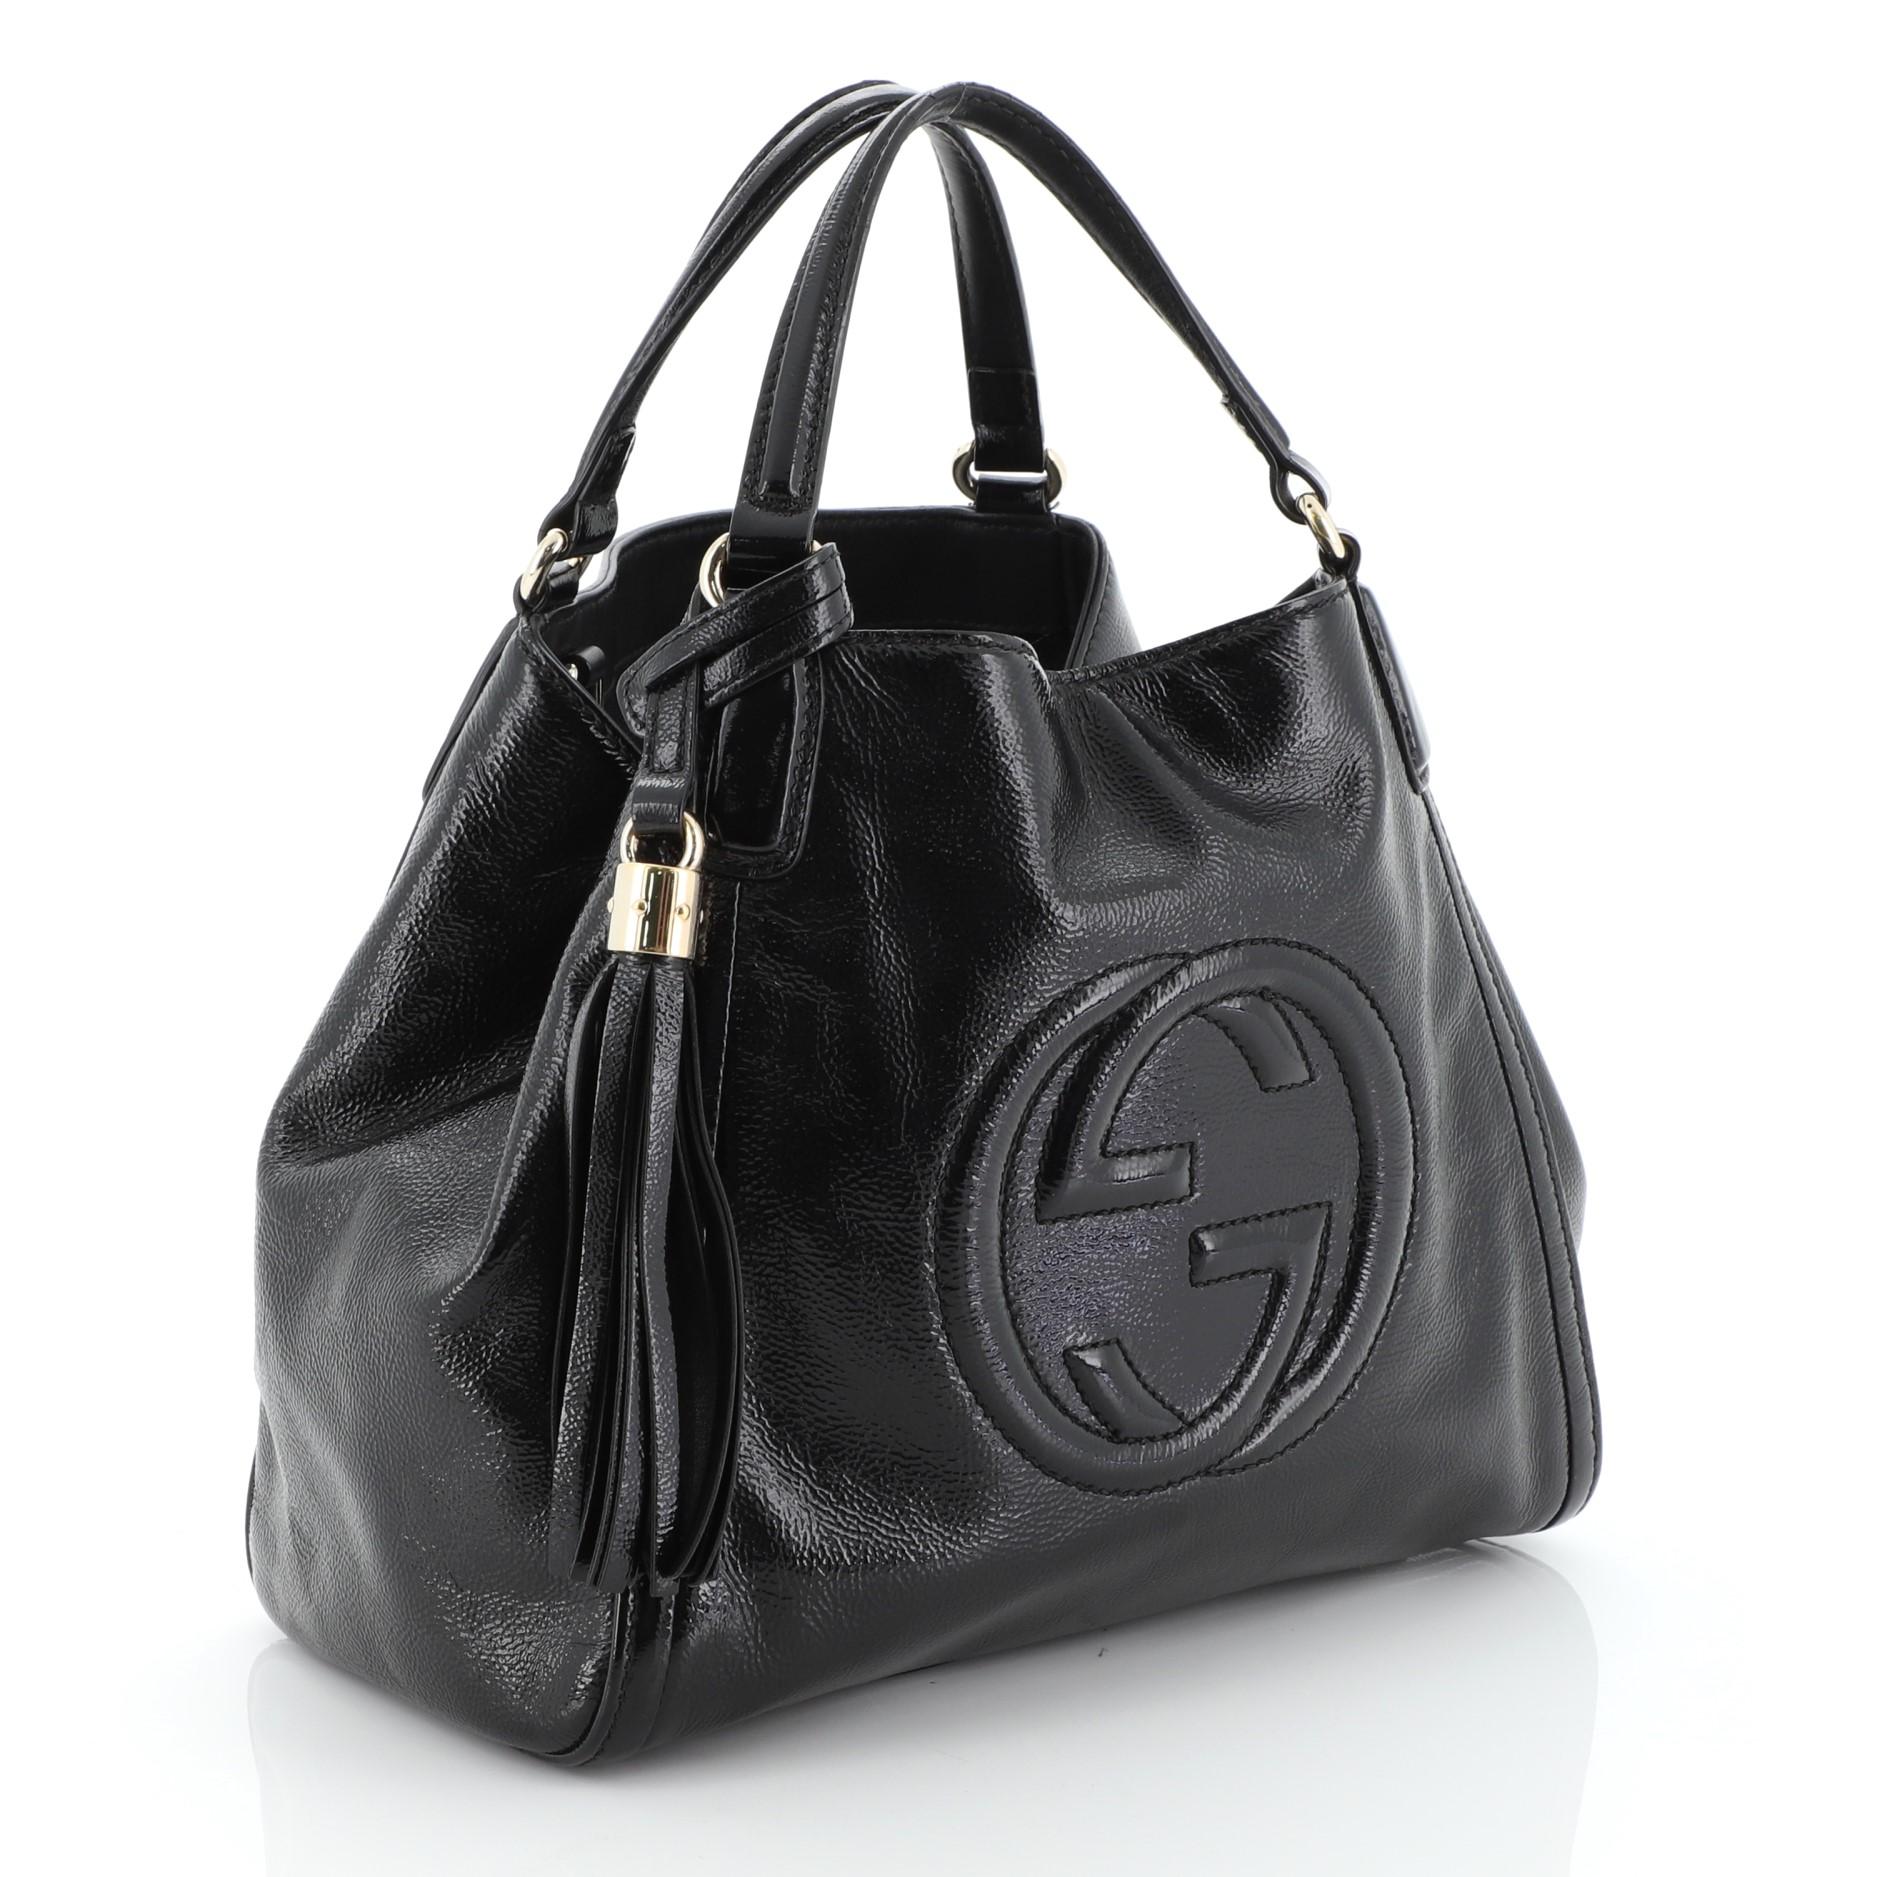 This Gucci Soho Convertible Shoulder Bag Patent Small, crafted from black patent leather, interlocking GG logo stitched at the front, dual looped top handles, protective base studs, and gold-tone hardware. Its hook clasp closure opens to a black